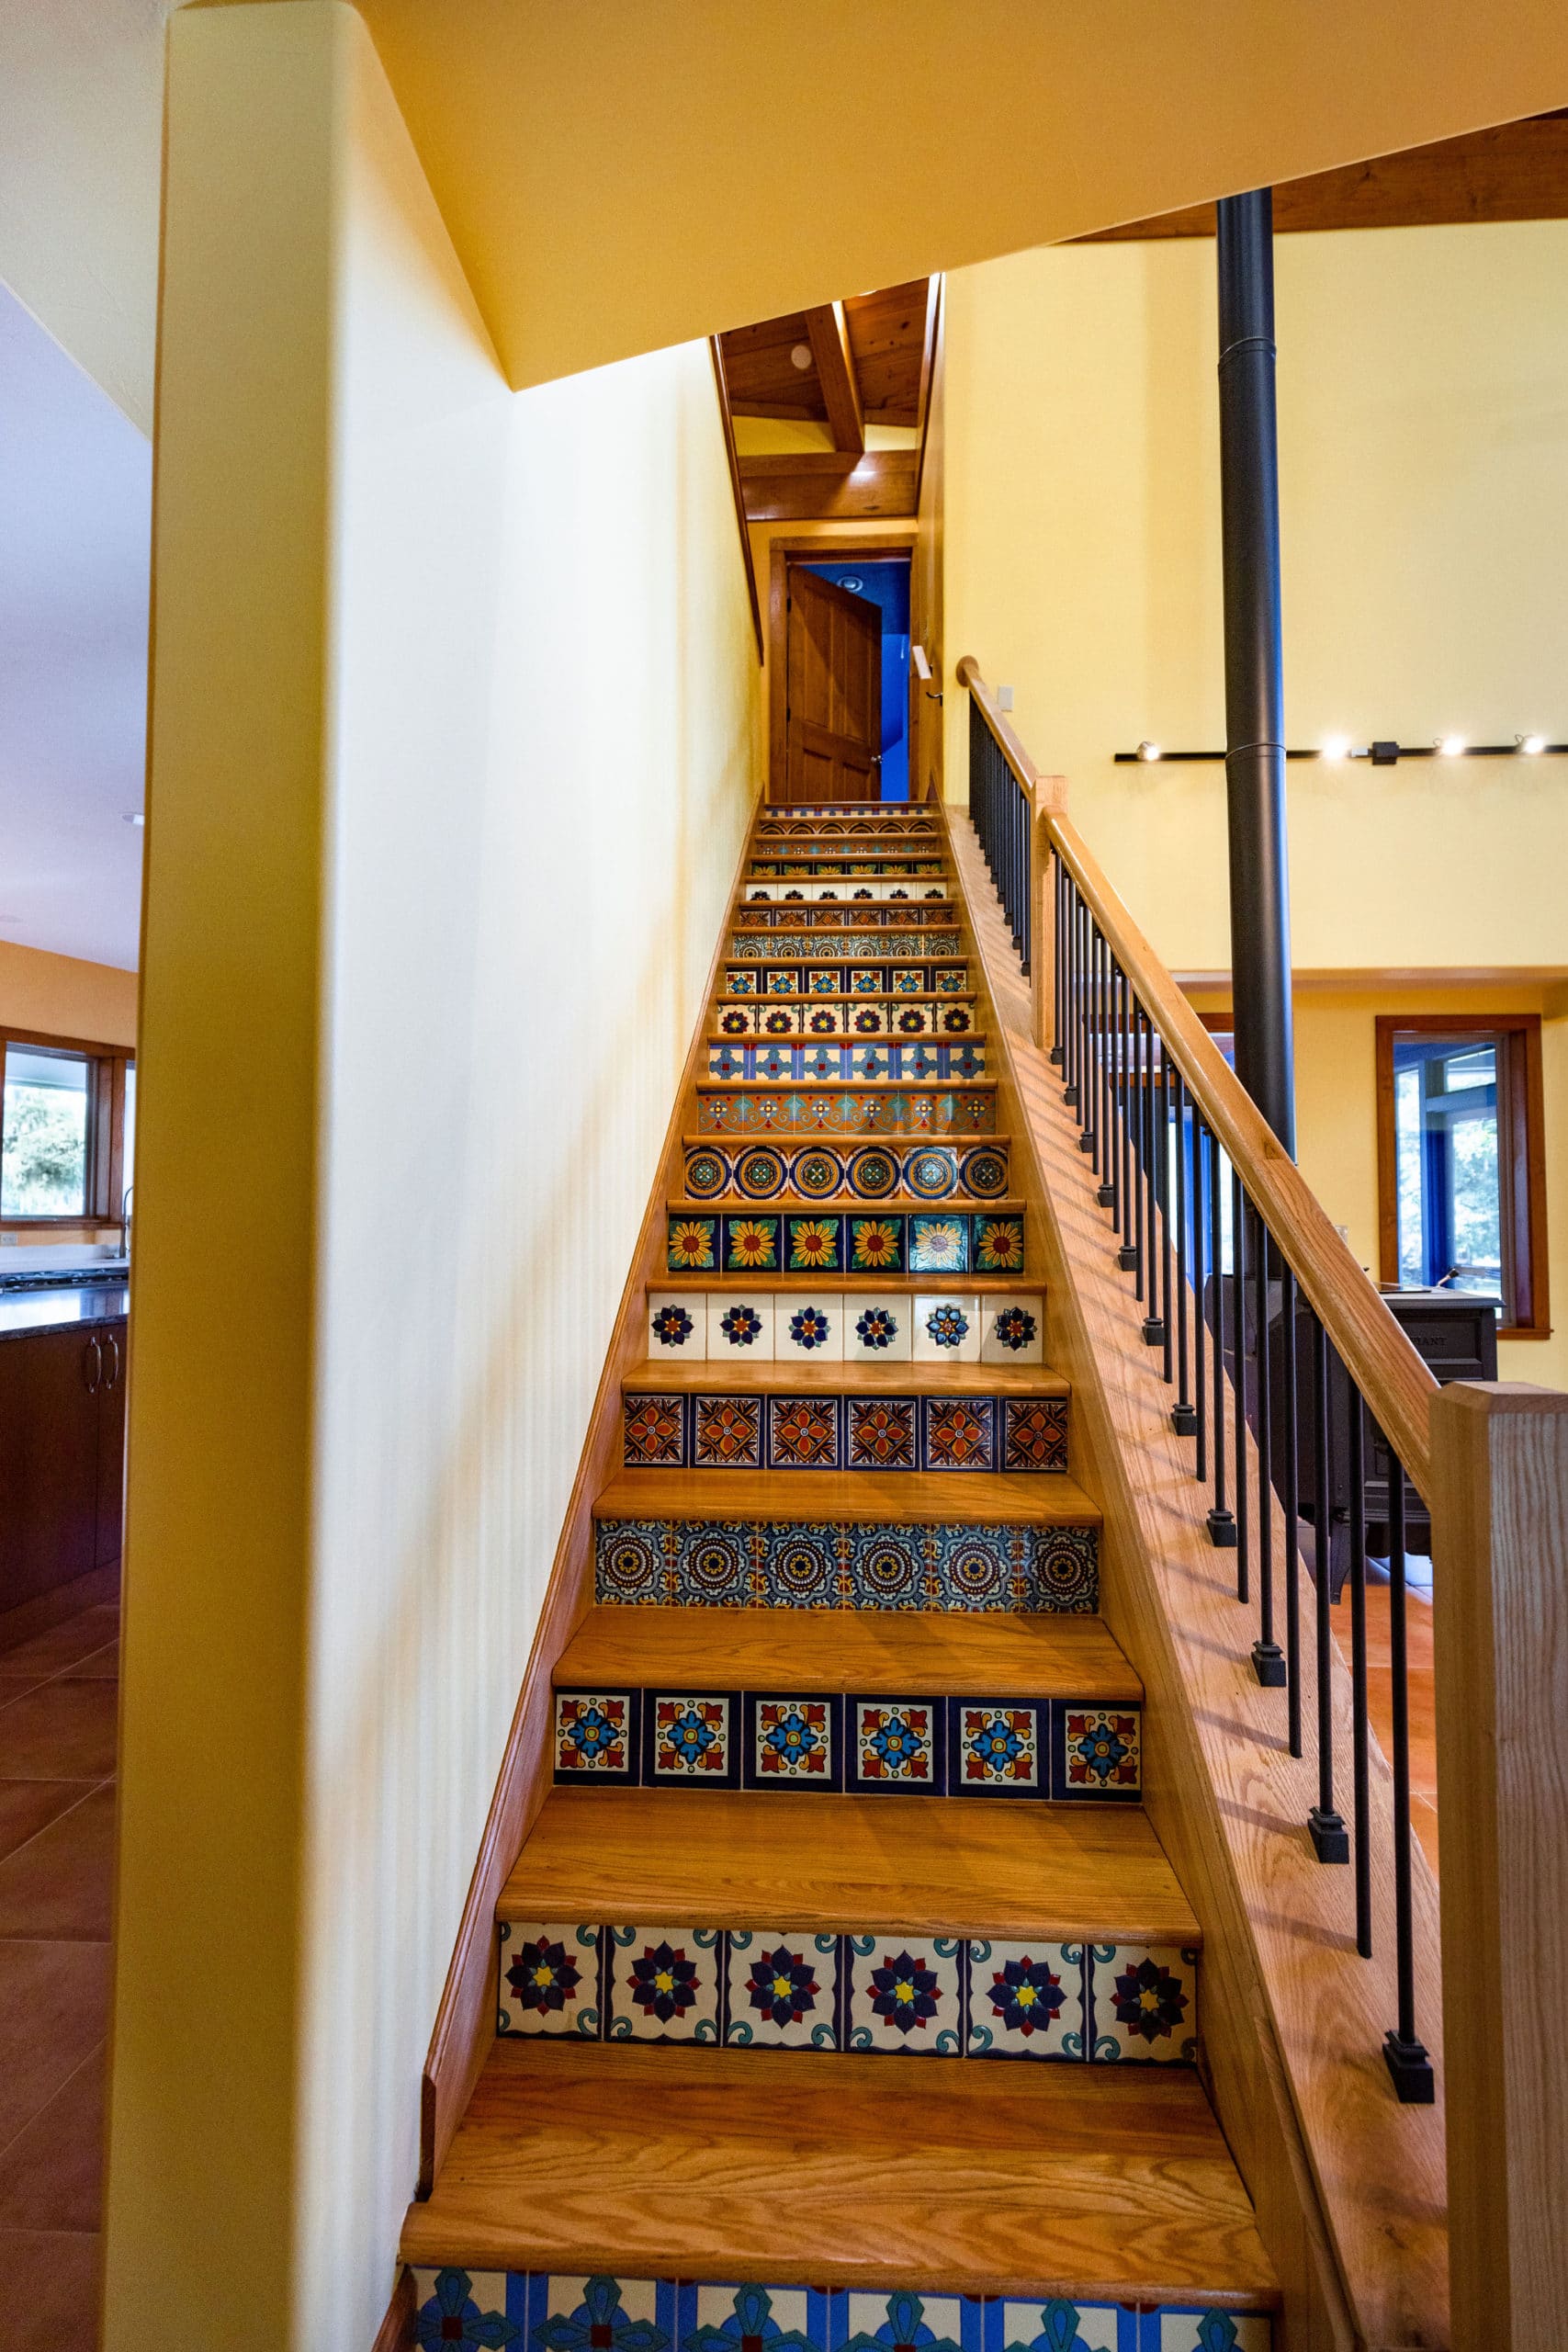 Interior Home Remodel - Beautiful wood staircase complete with decorative tiles.